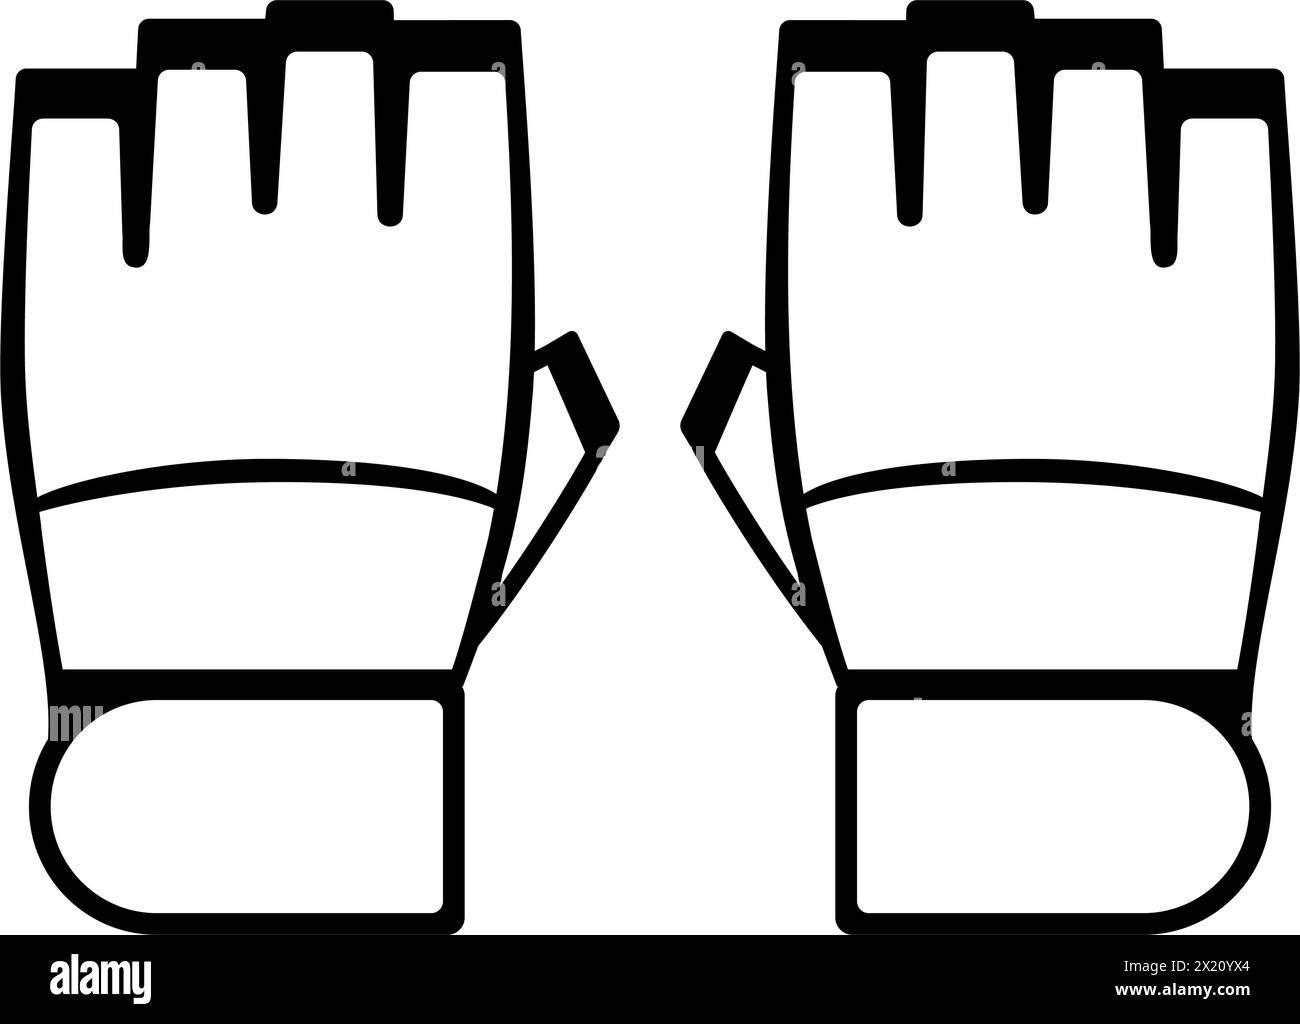 Mixed martial arts equipment: sparring gloves icon Stock Vector